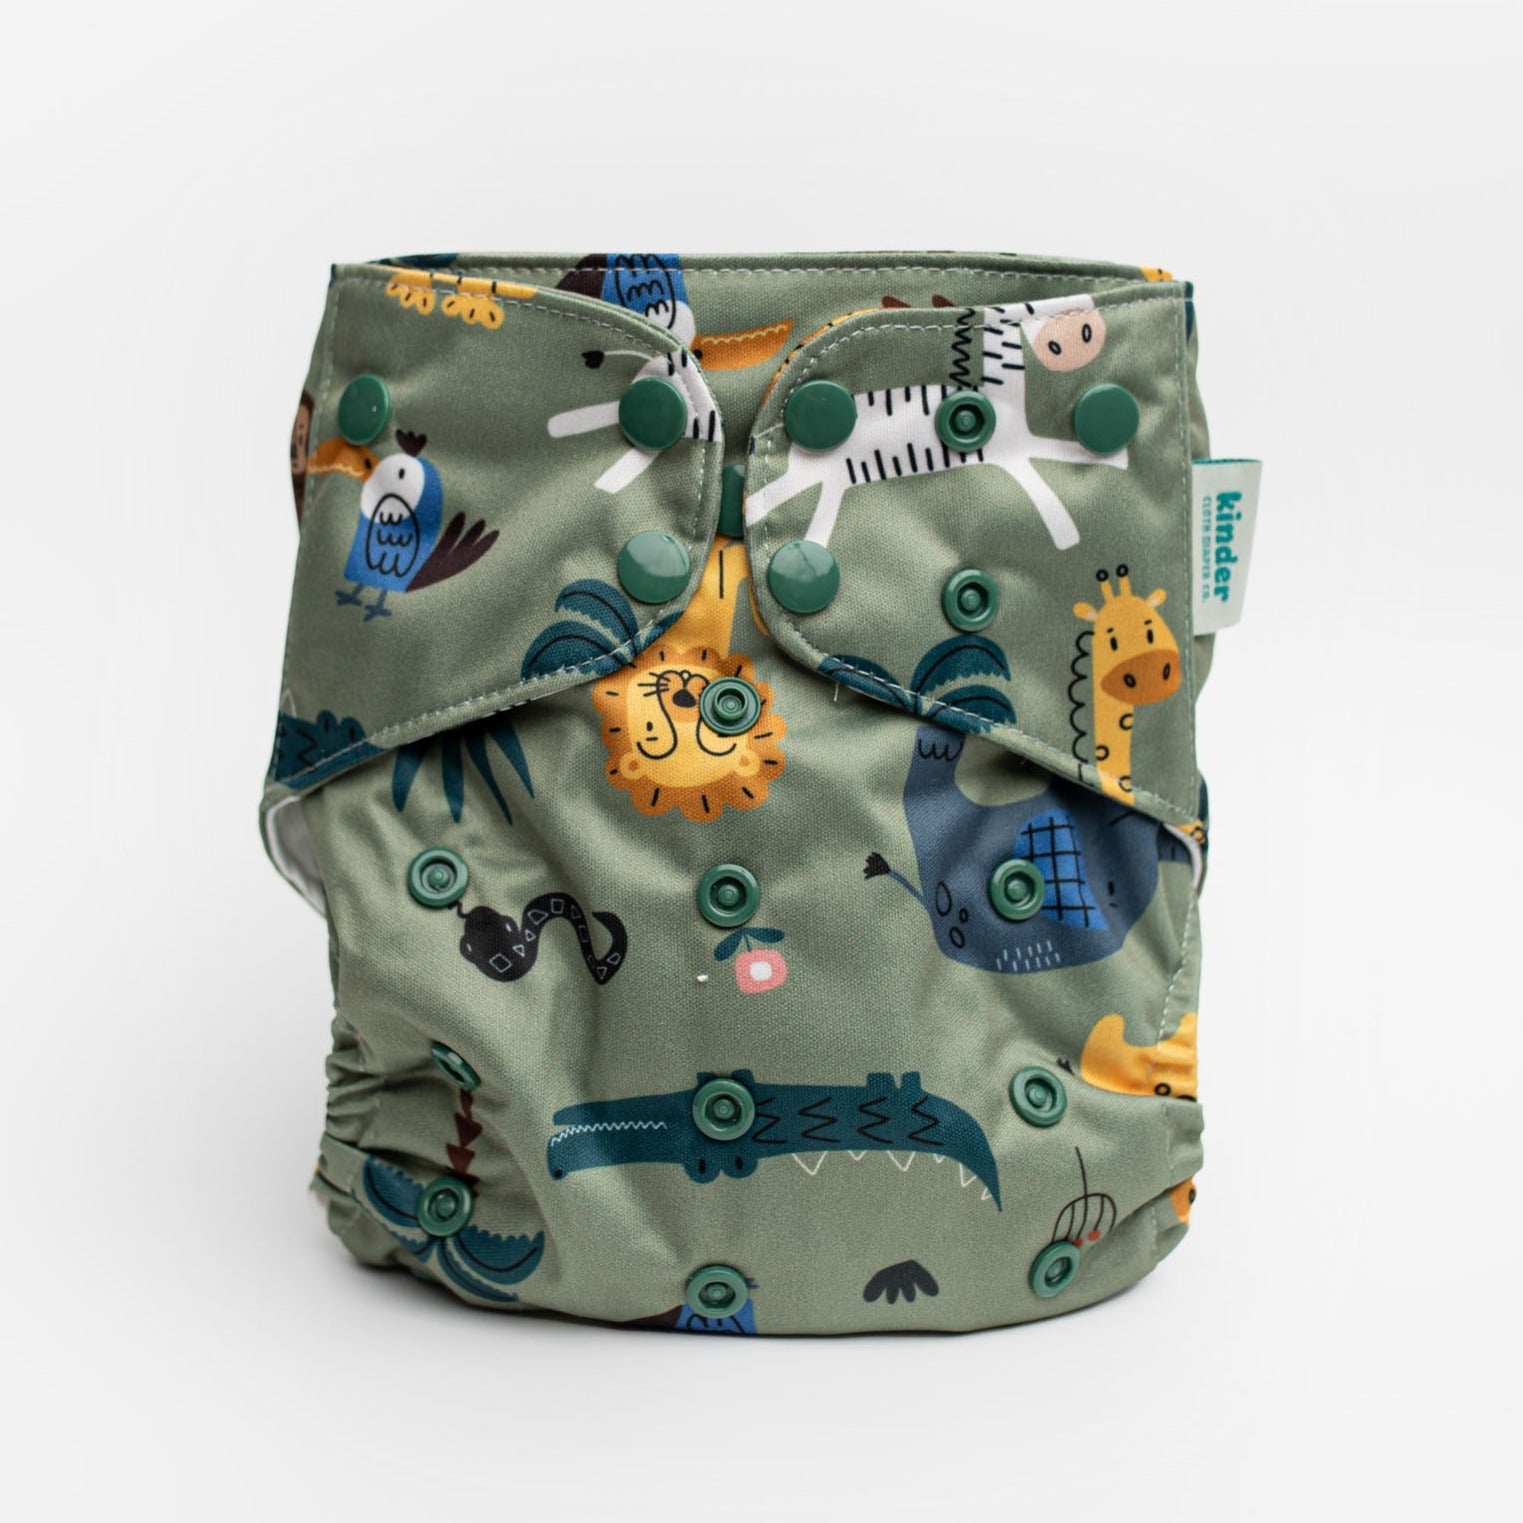 modern cloth diaper with athletic wicking jersey one of a kind prints safari pattern gender neutral put cloth diapers on your baby registry